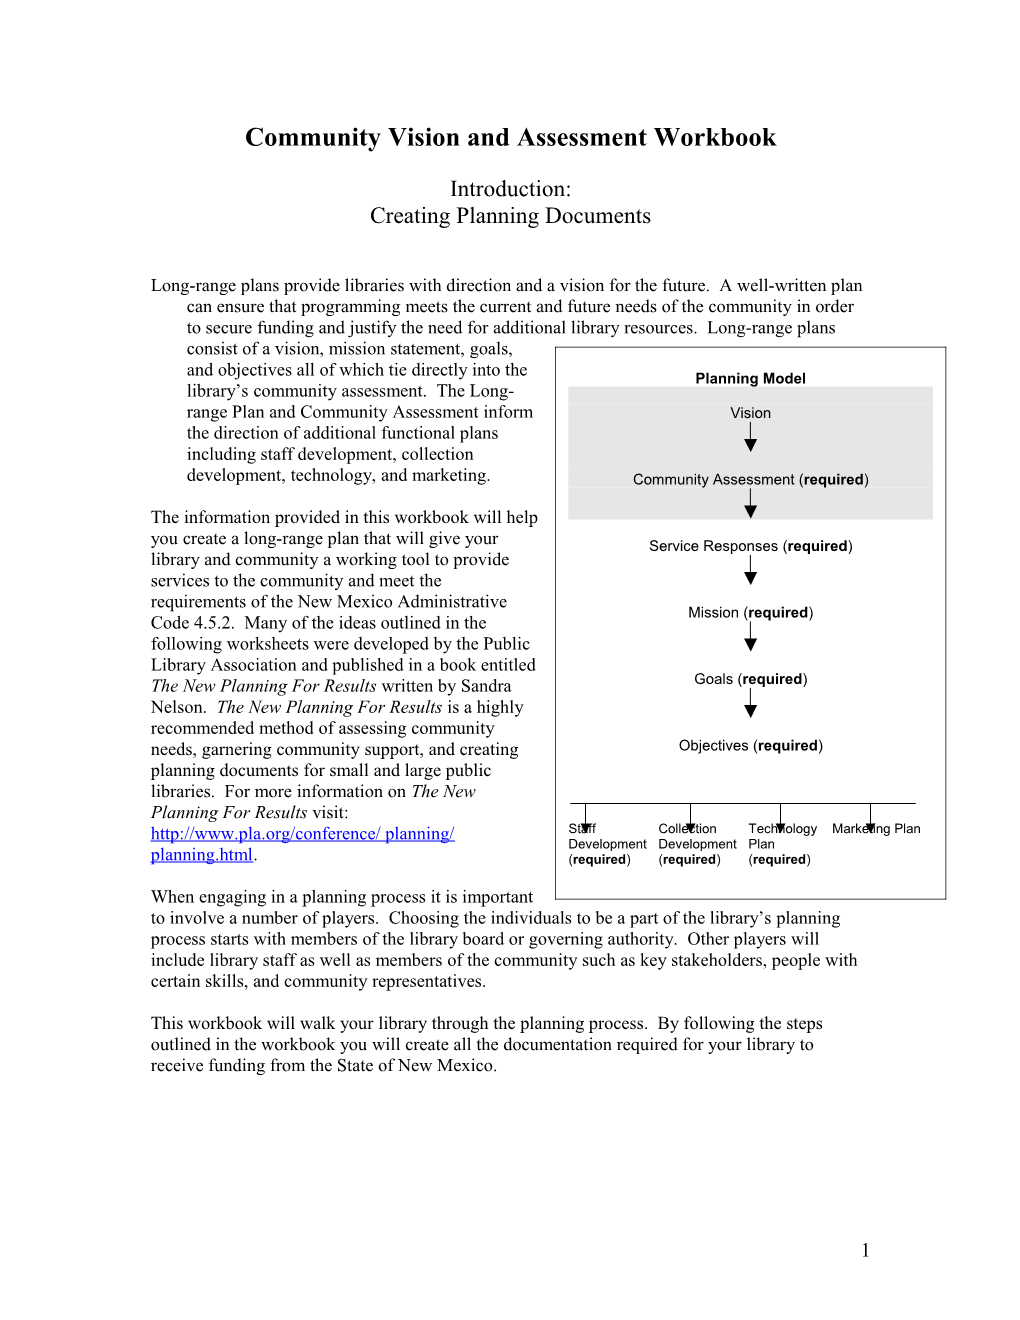 Community Vision and Assessment Workbook